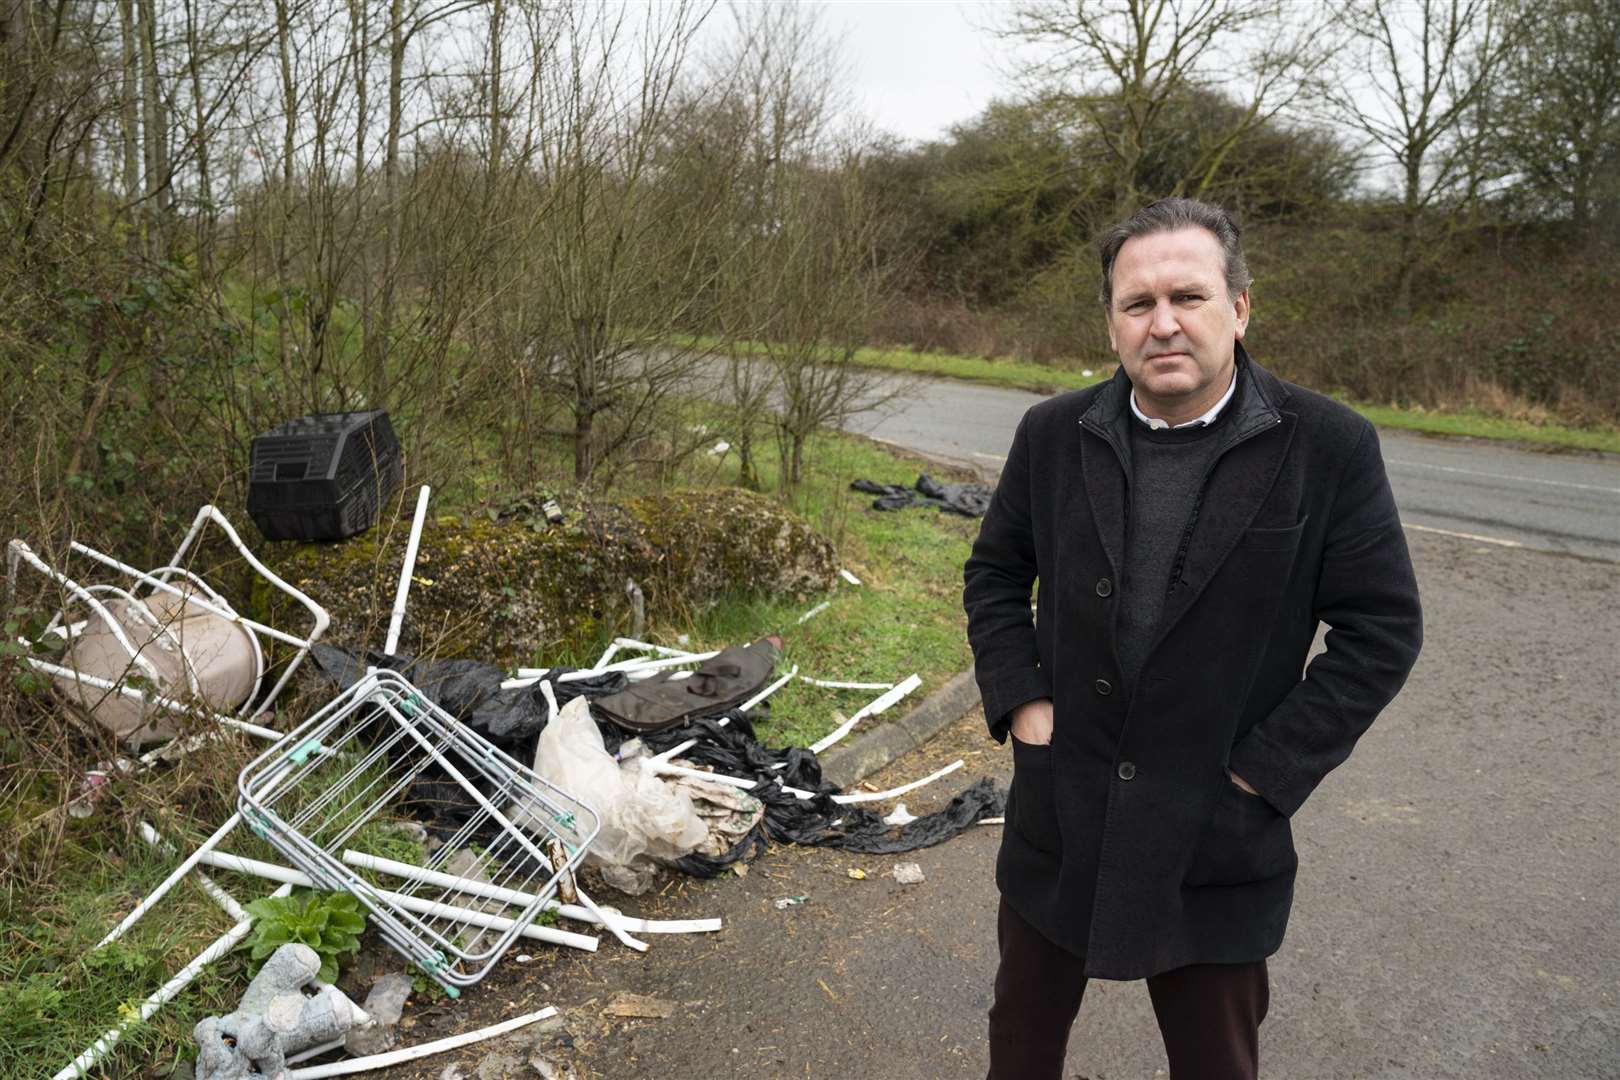 Danny Lucas finds more waste in Tonbridge and Malling